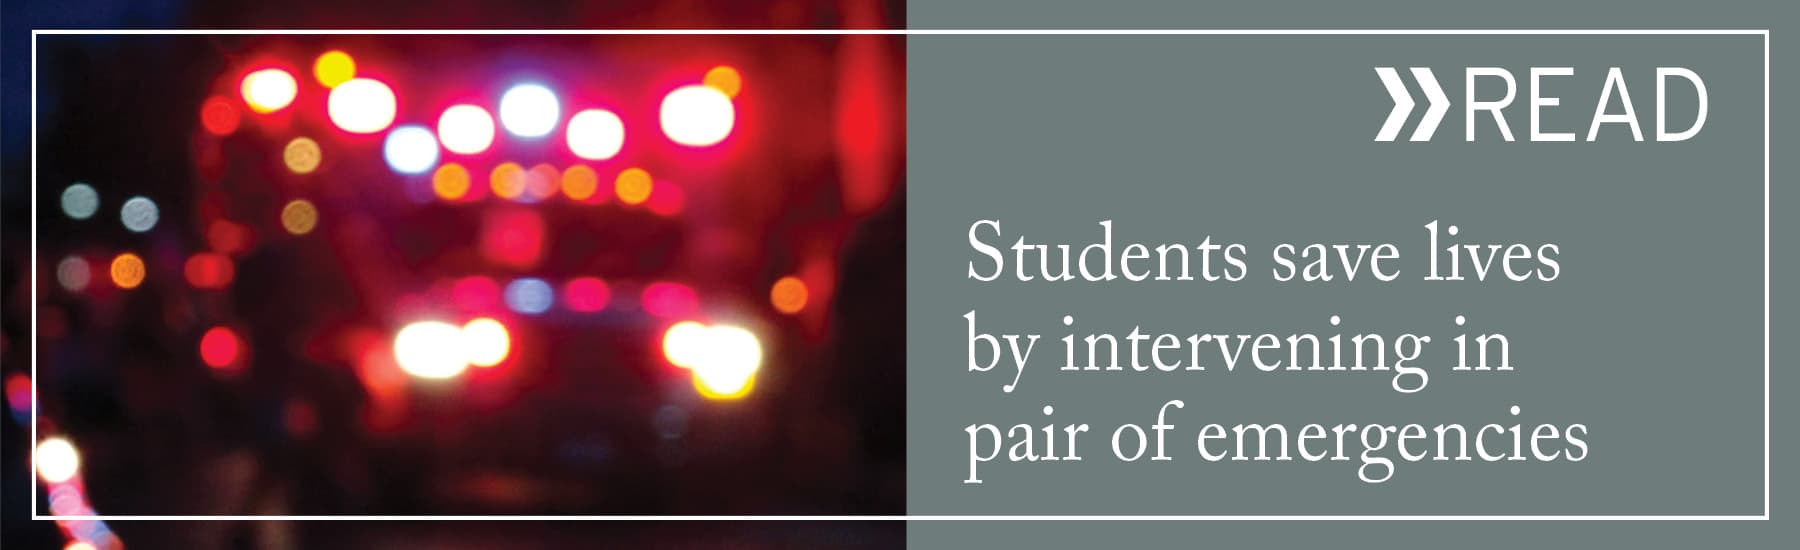 READ: Students save lives by intervening in pair of emergencies